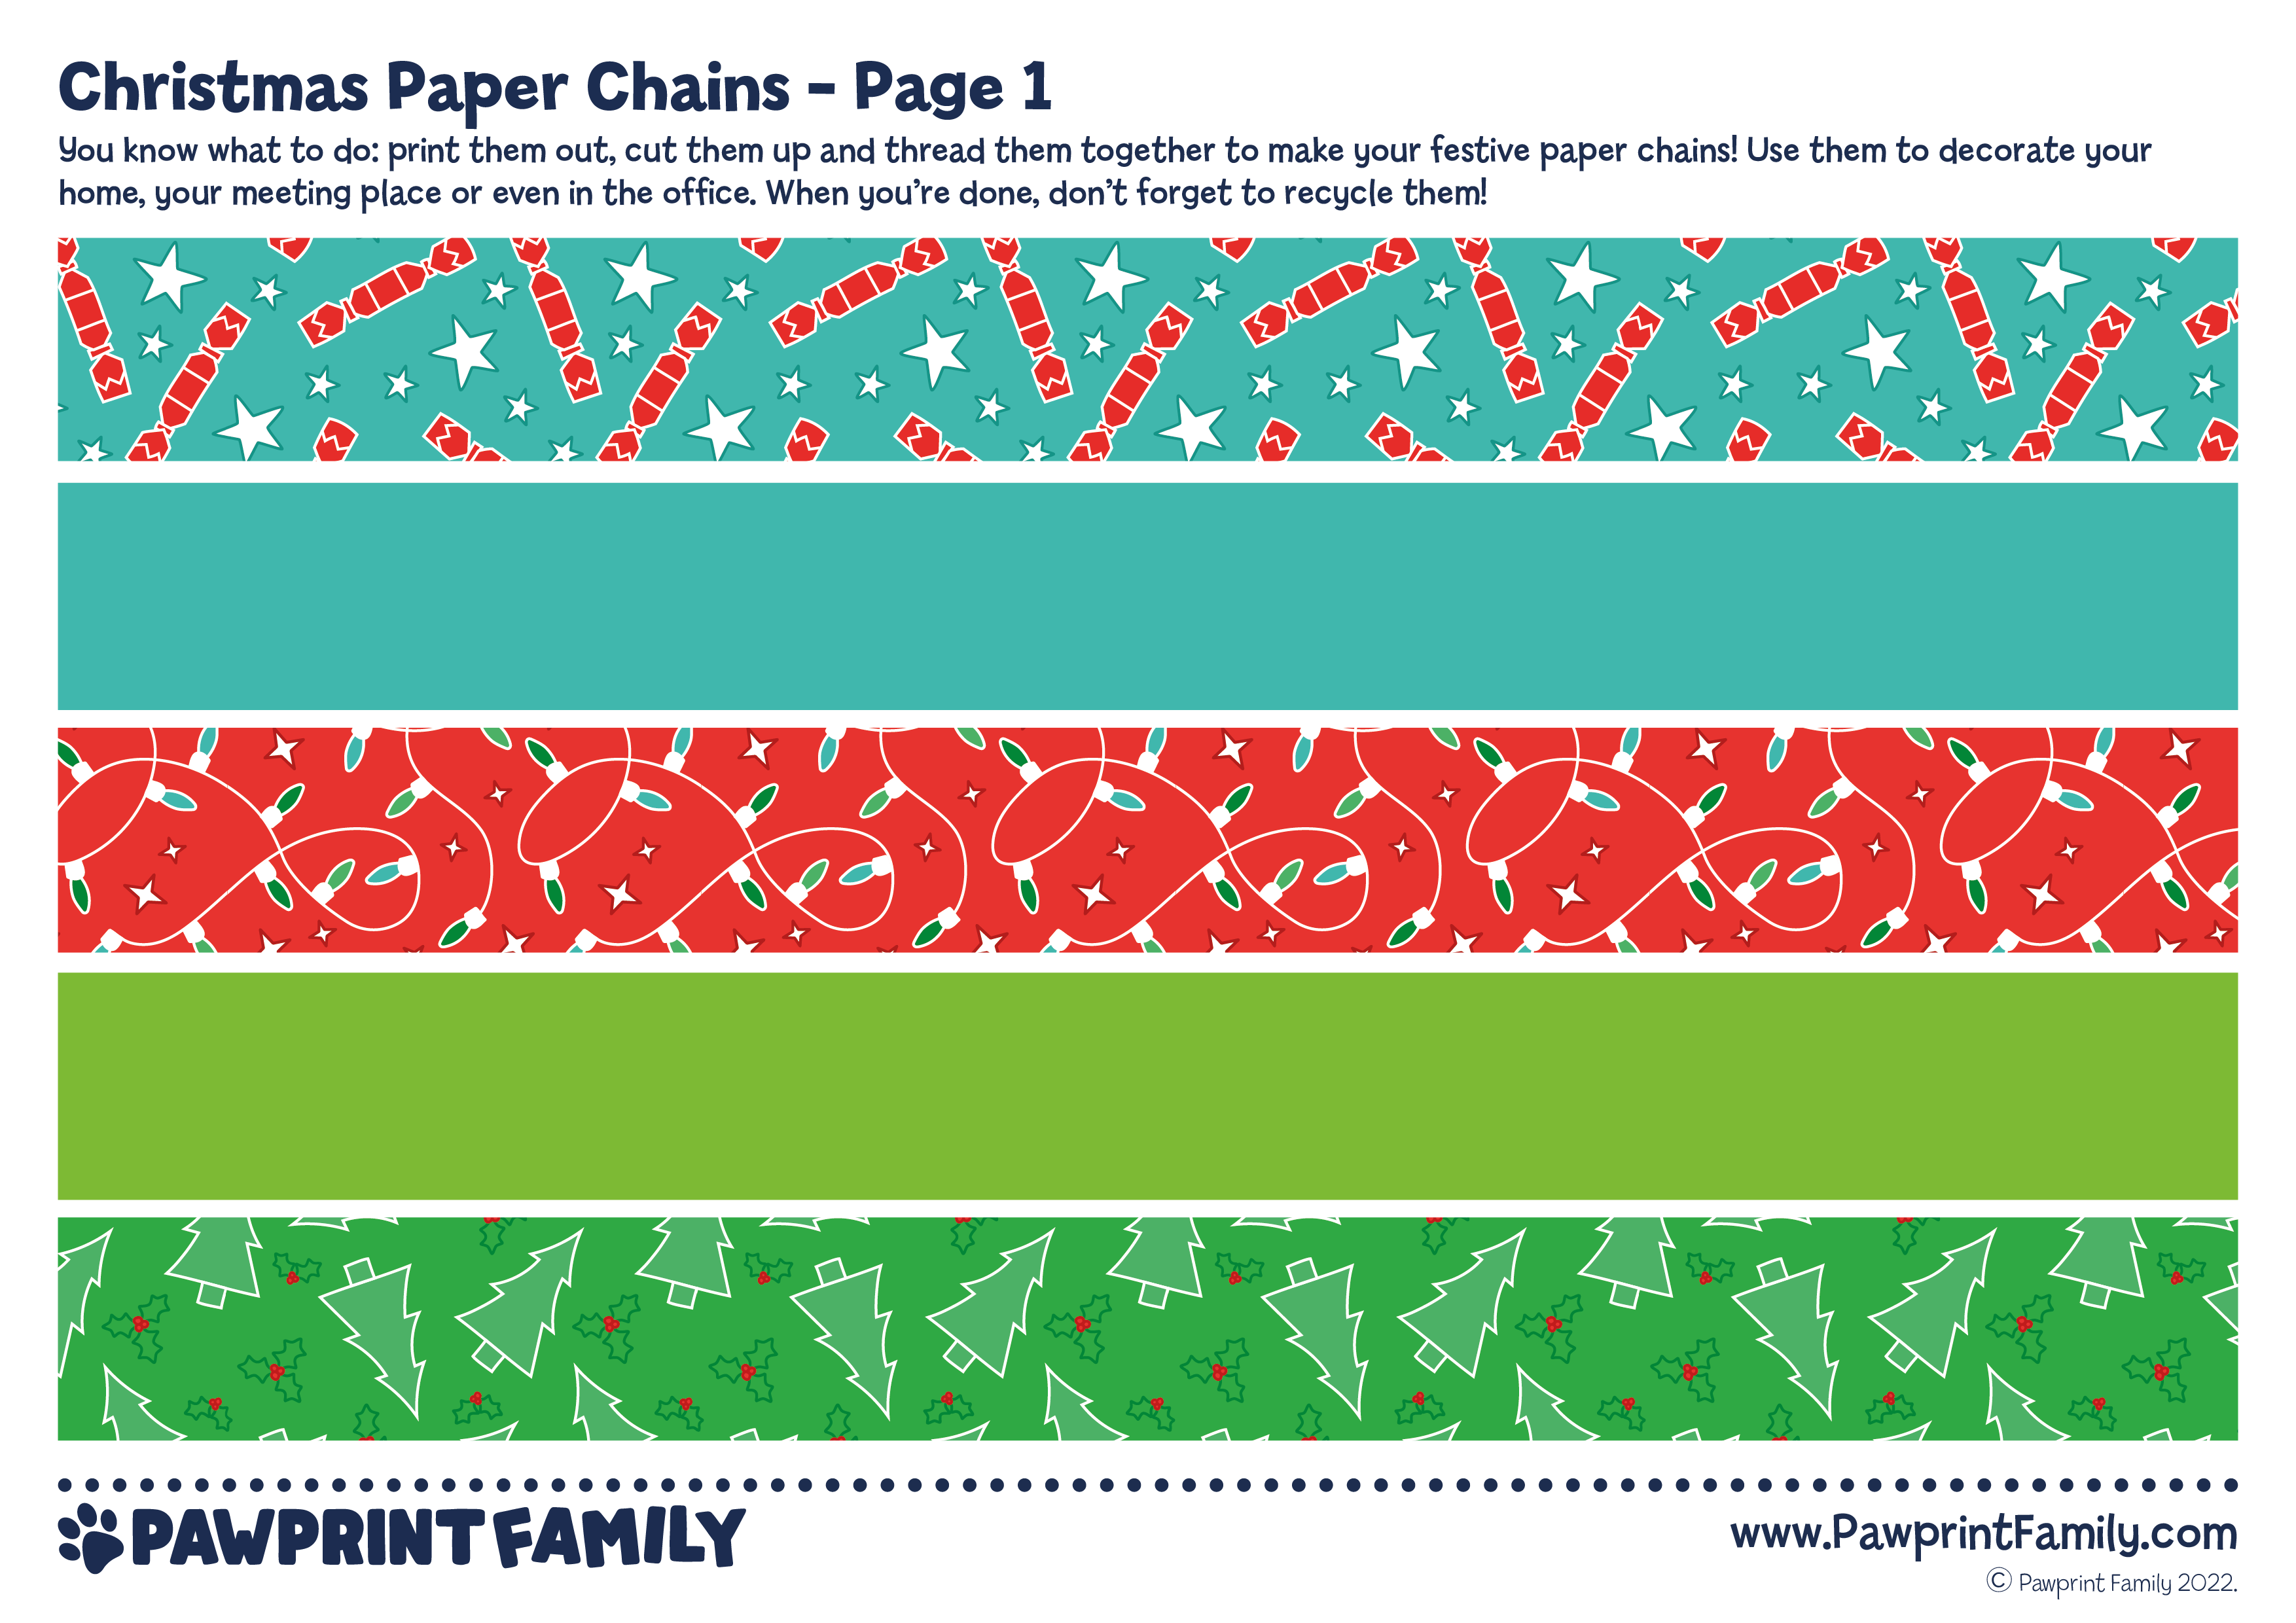 Christmas Paper Chains Pawprint Family